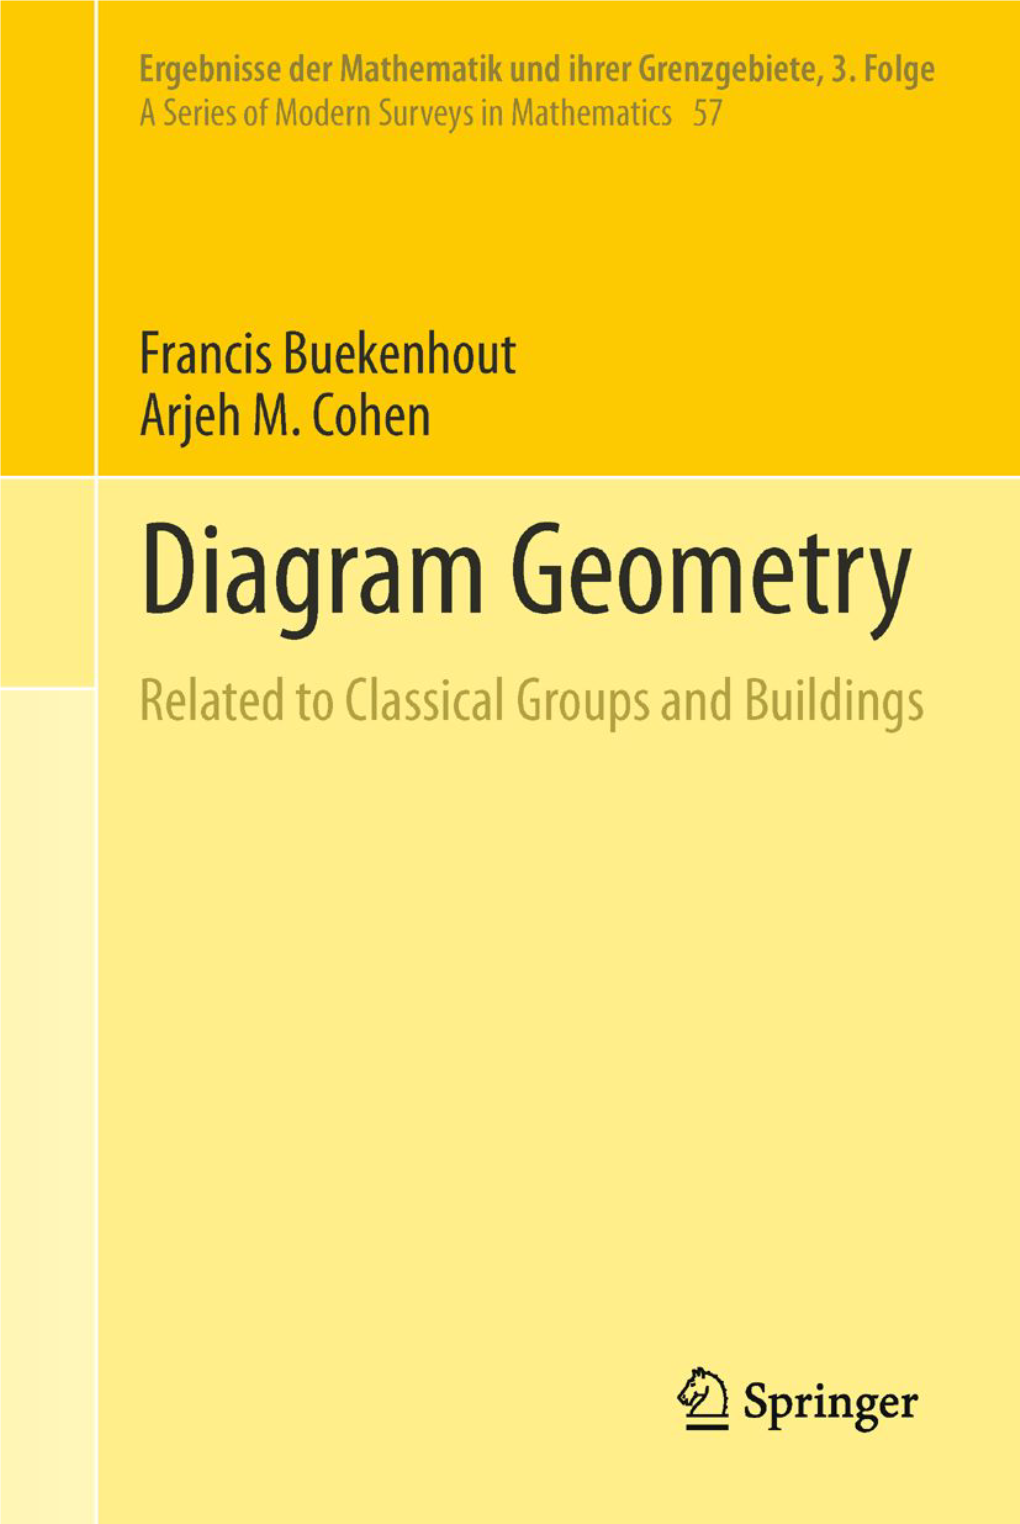 Buekenhout F., Cohen A.M. Diagram Geometry. Related to Classical